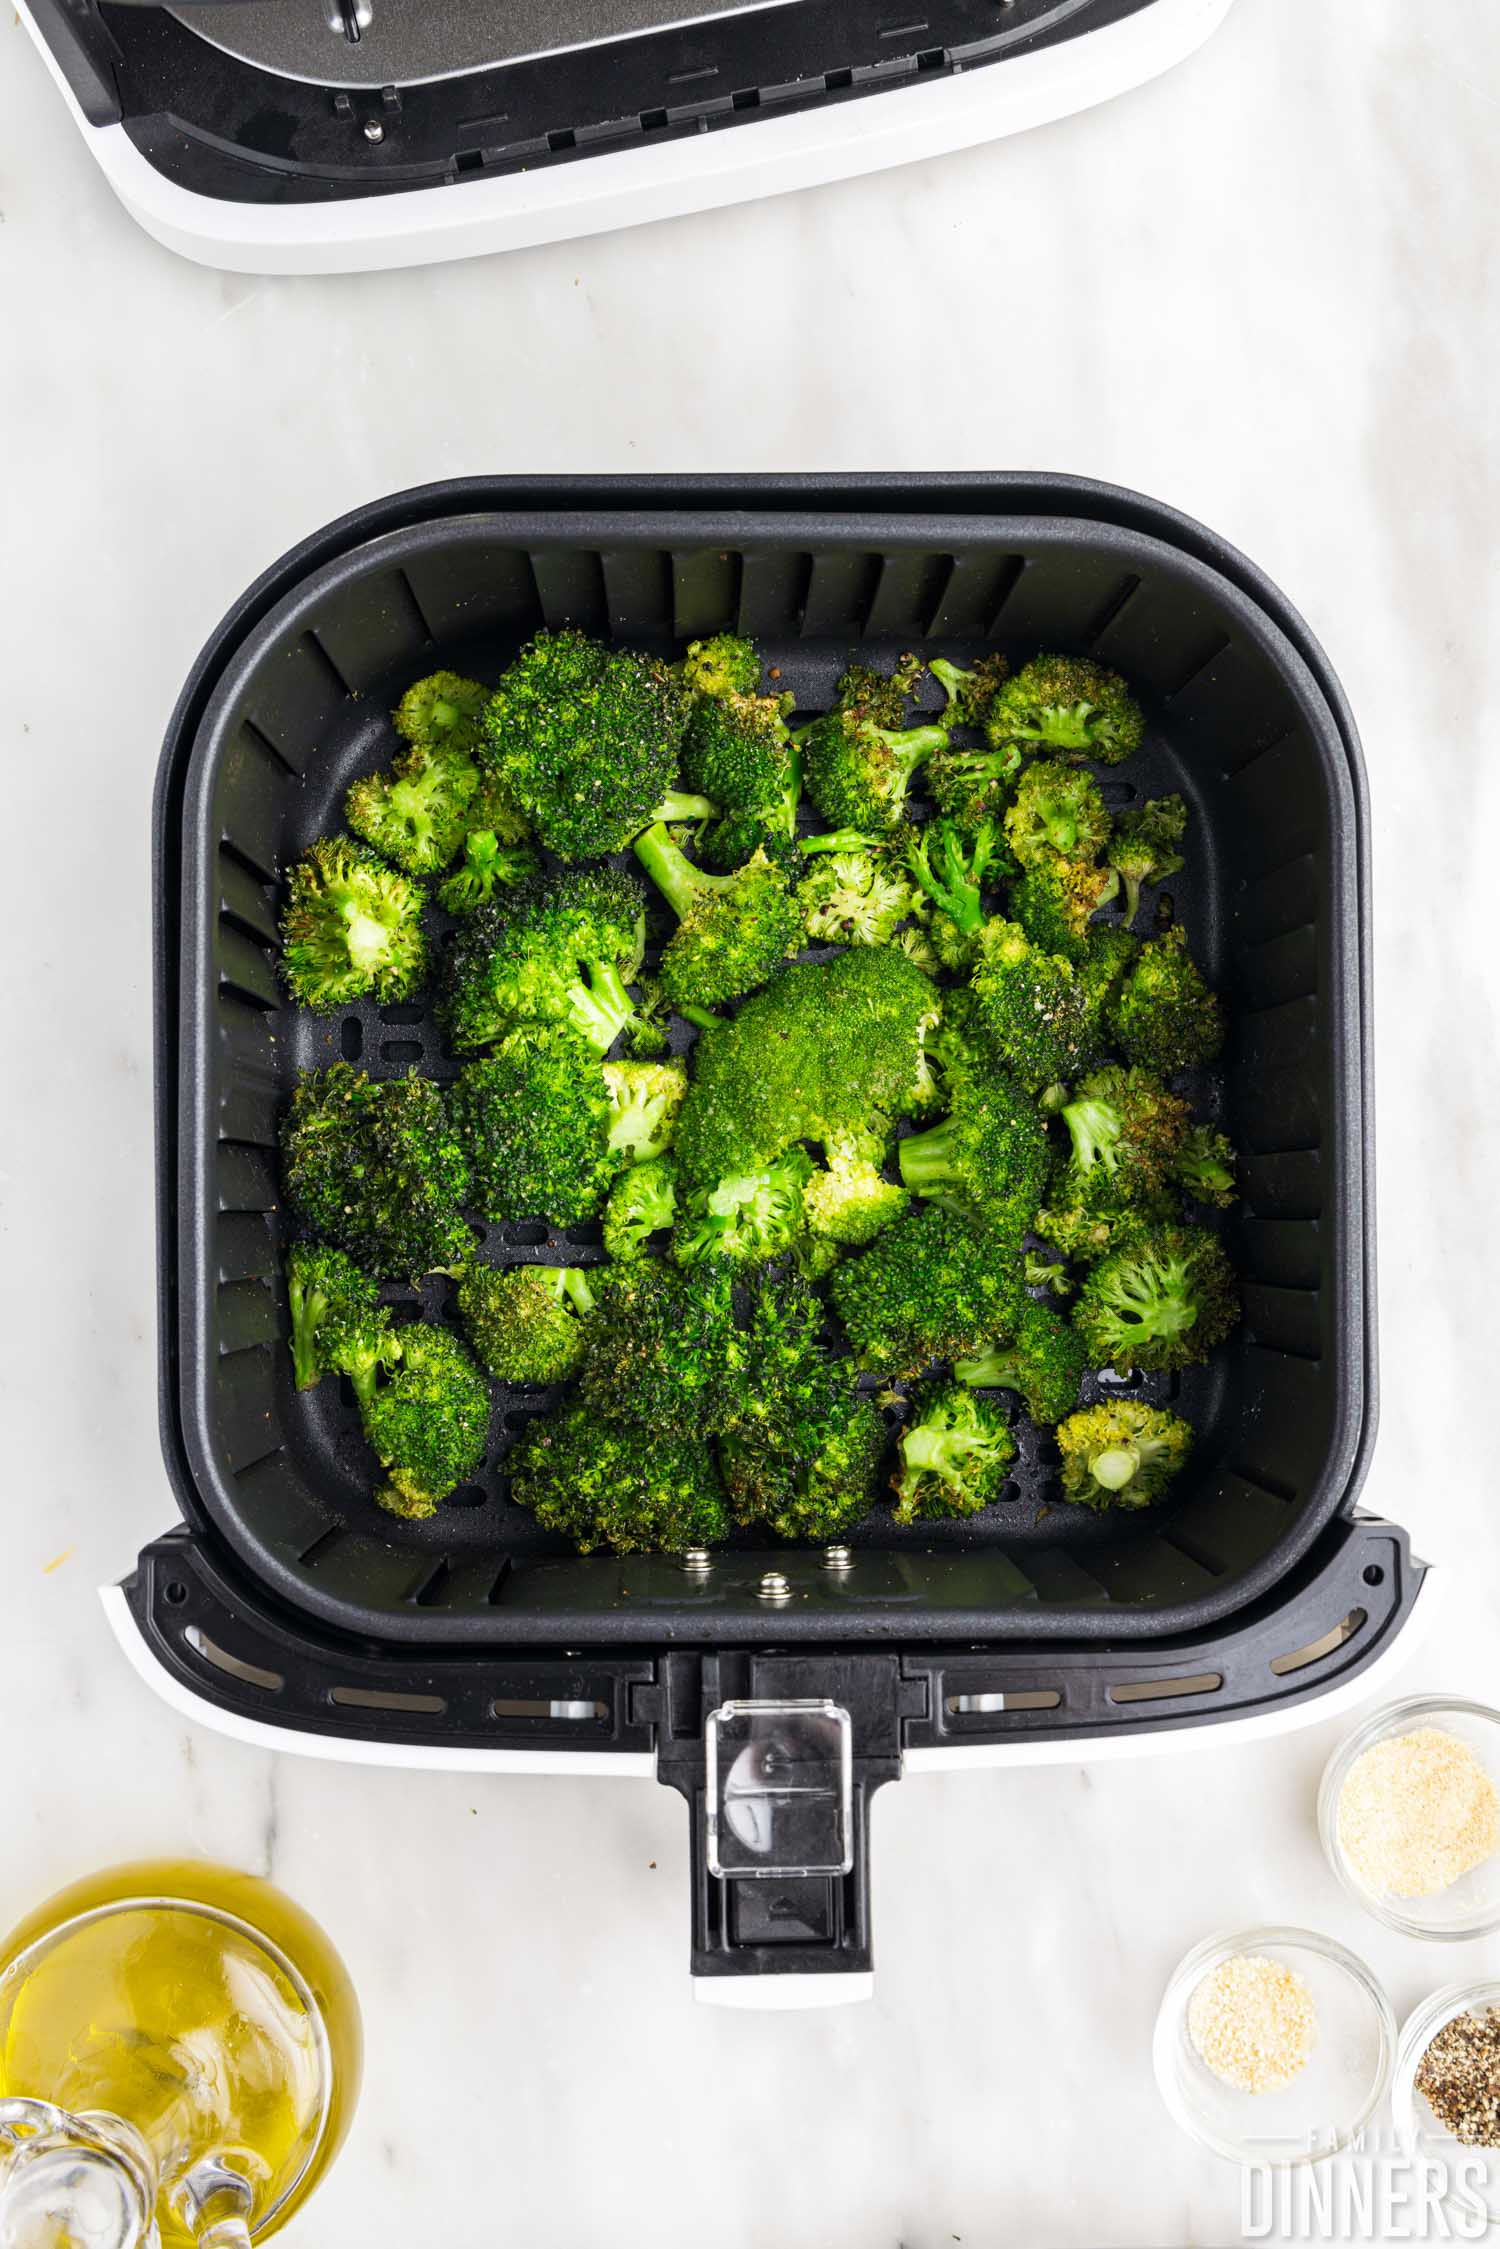 cooked broccoli in air fryer basket.